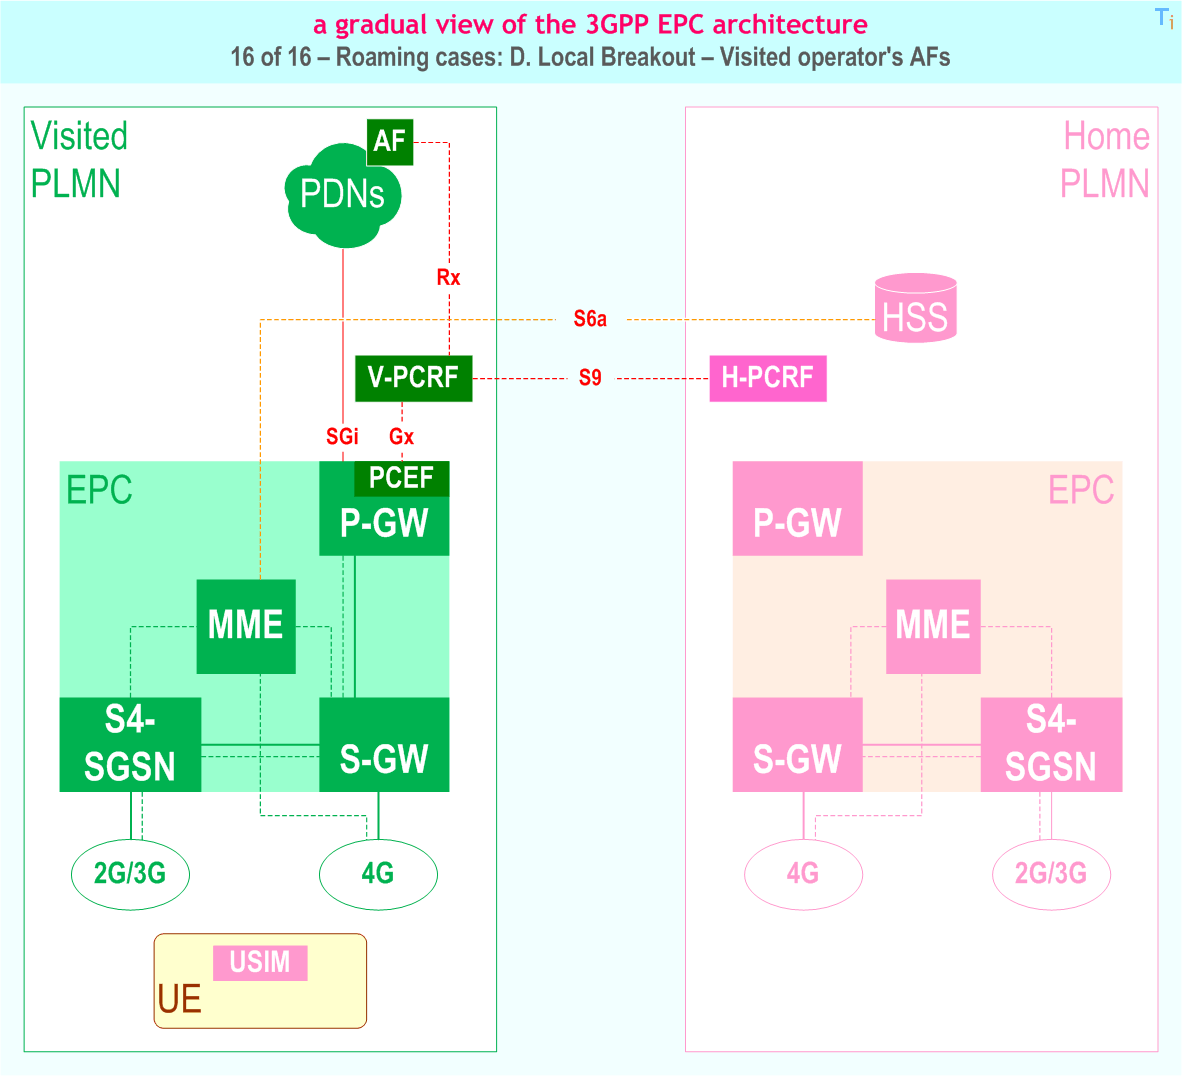 Gradual view of the 3GPP EPC (Evolved Packet Core) architecture - 16 of 16 - EPC Roaming: Local Breakout - with visited operator's AFs